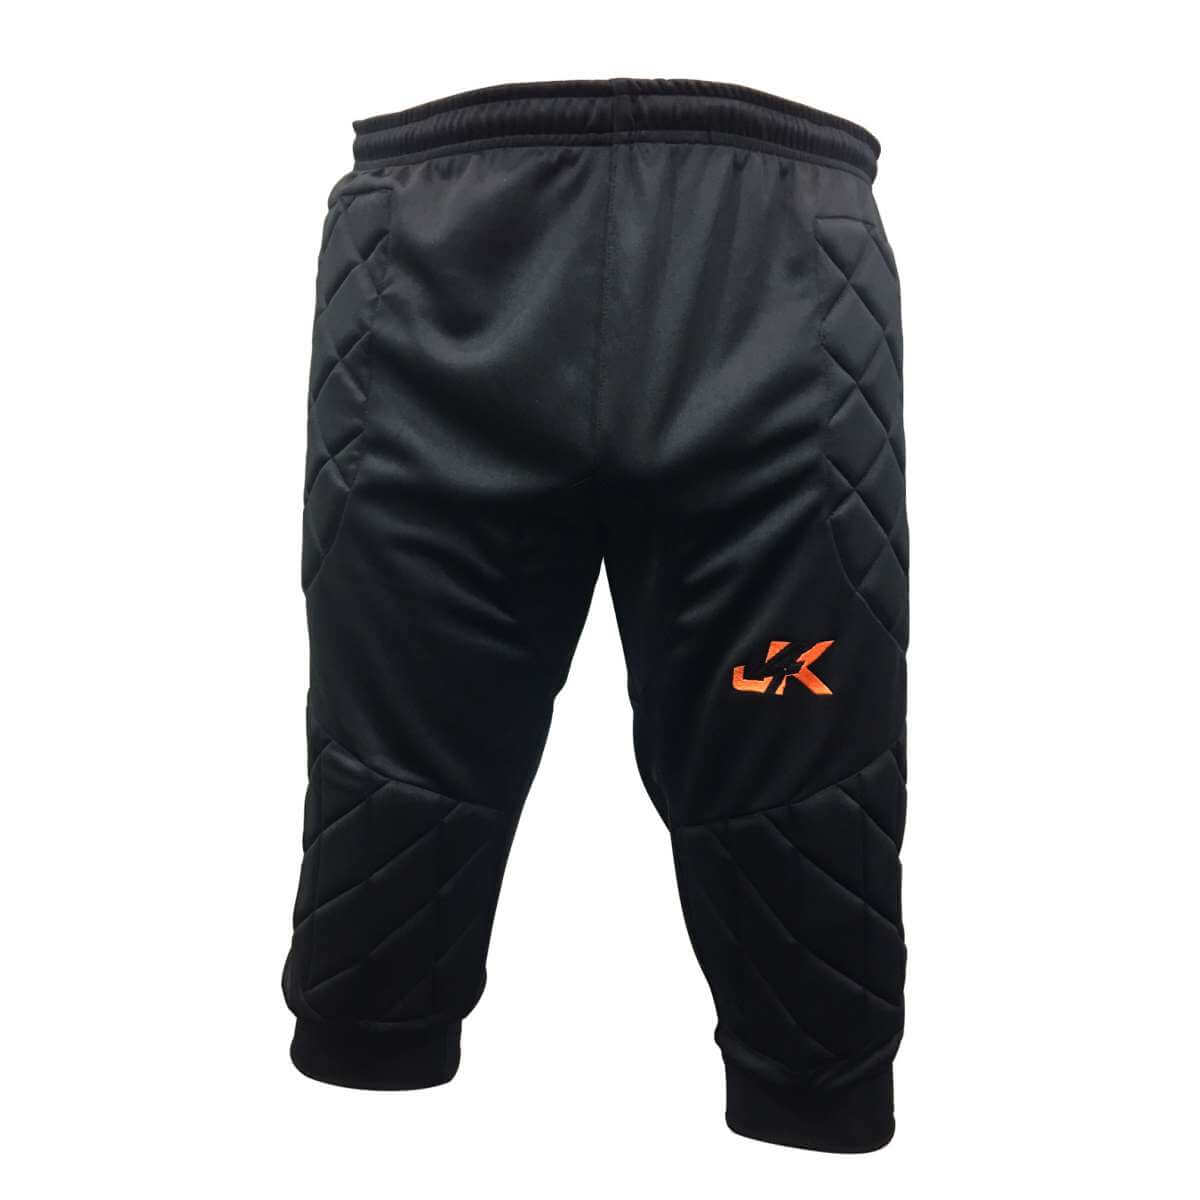 GOALKEEPER PADDED BOTTOMS GOALIE PANTS TROUSERS KIDS JUNIOR YOUTH ADULT